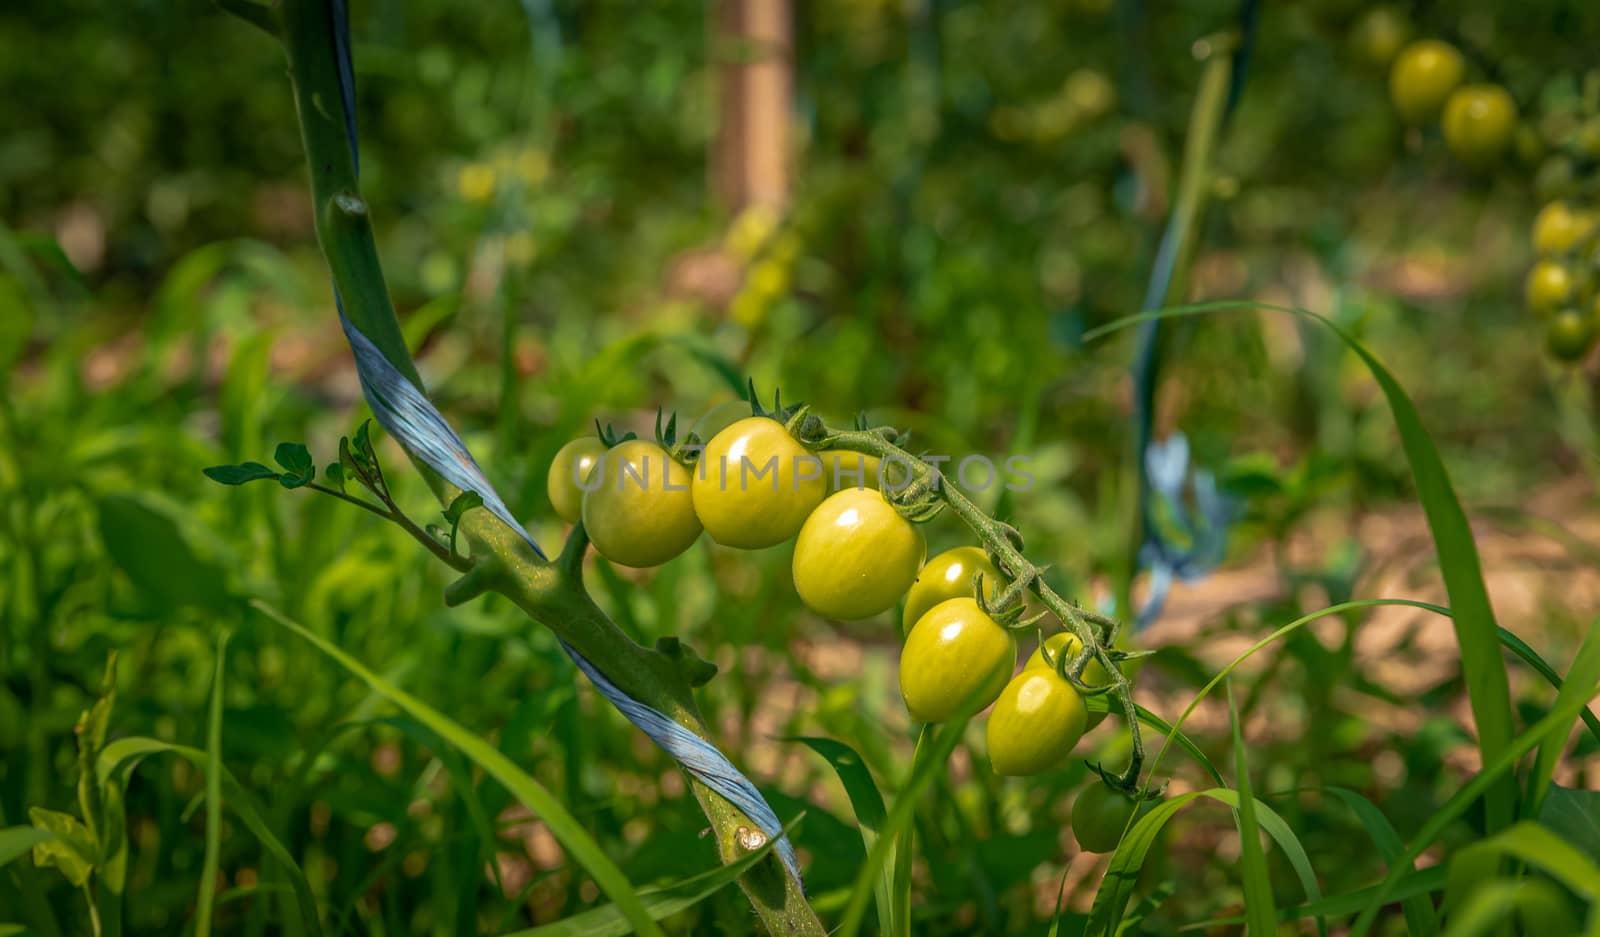 ripening green tomatoes in a greenhouse on an organic farm. healthy vegetables full of vitamins.